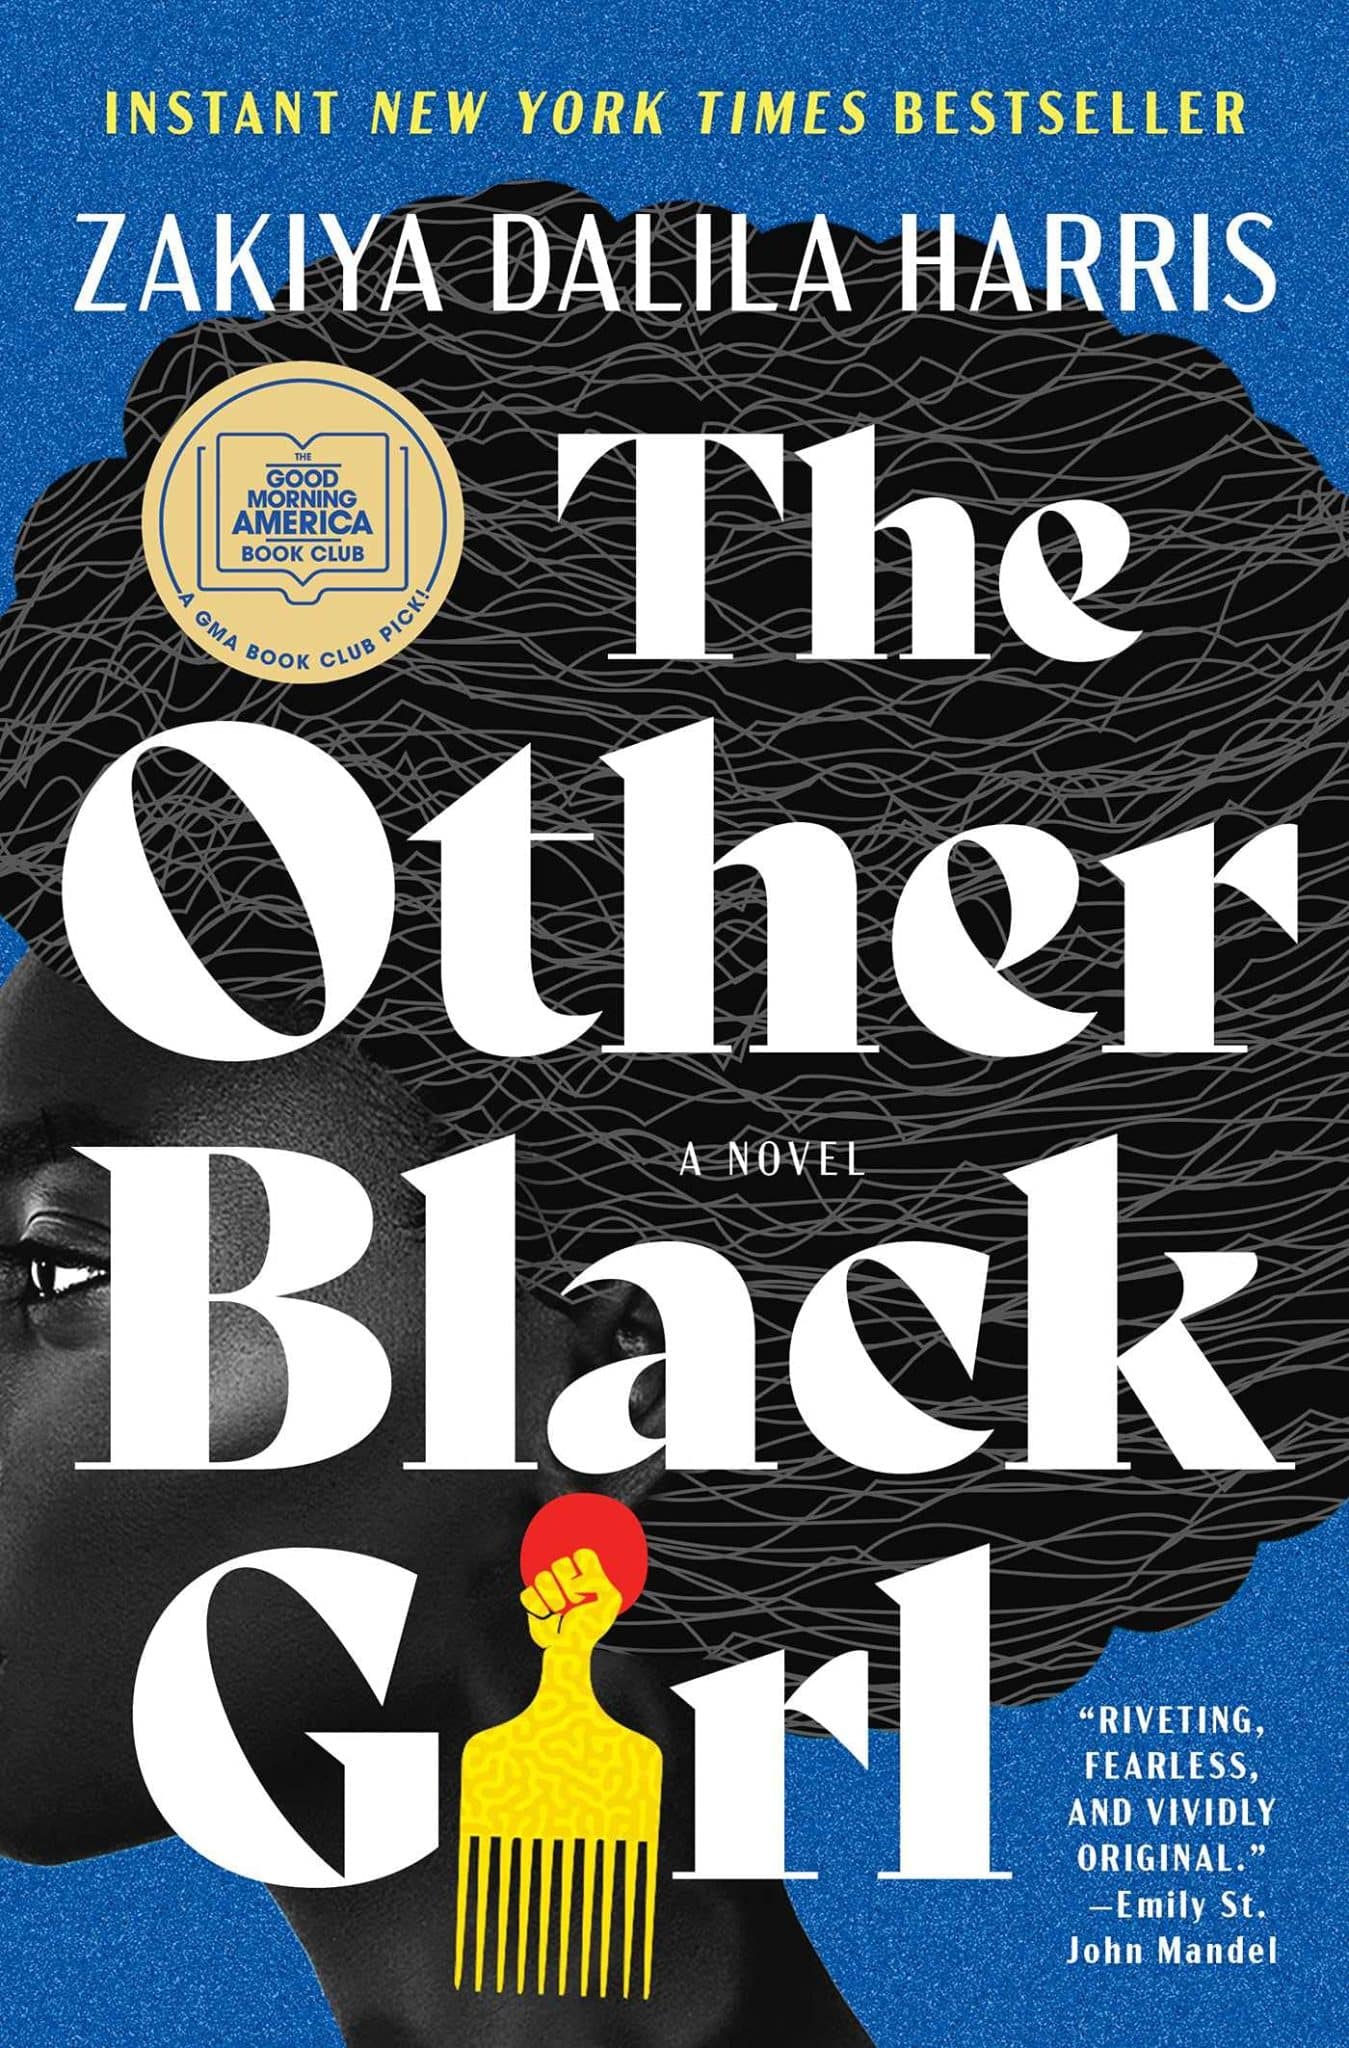 The Other Black Girl Front